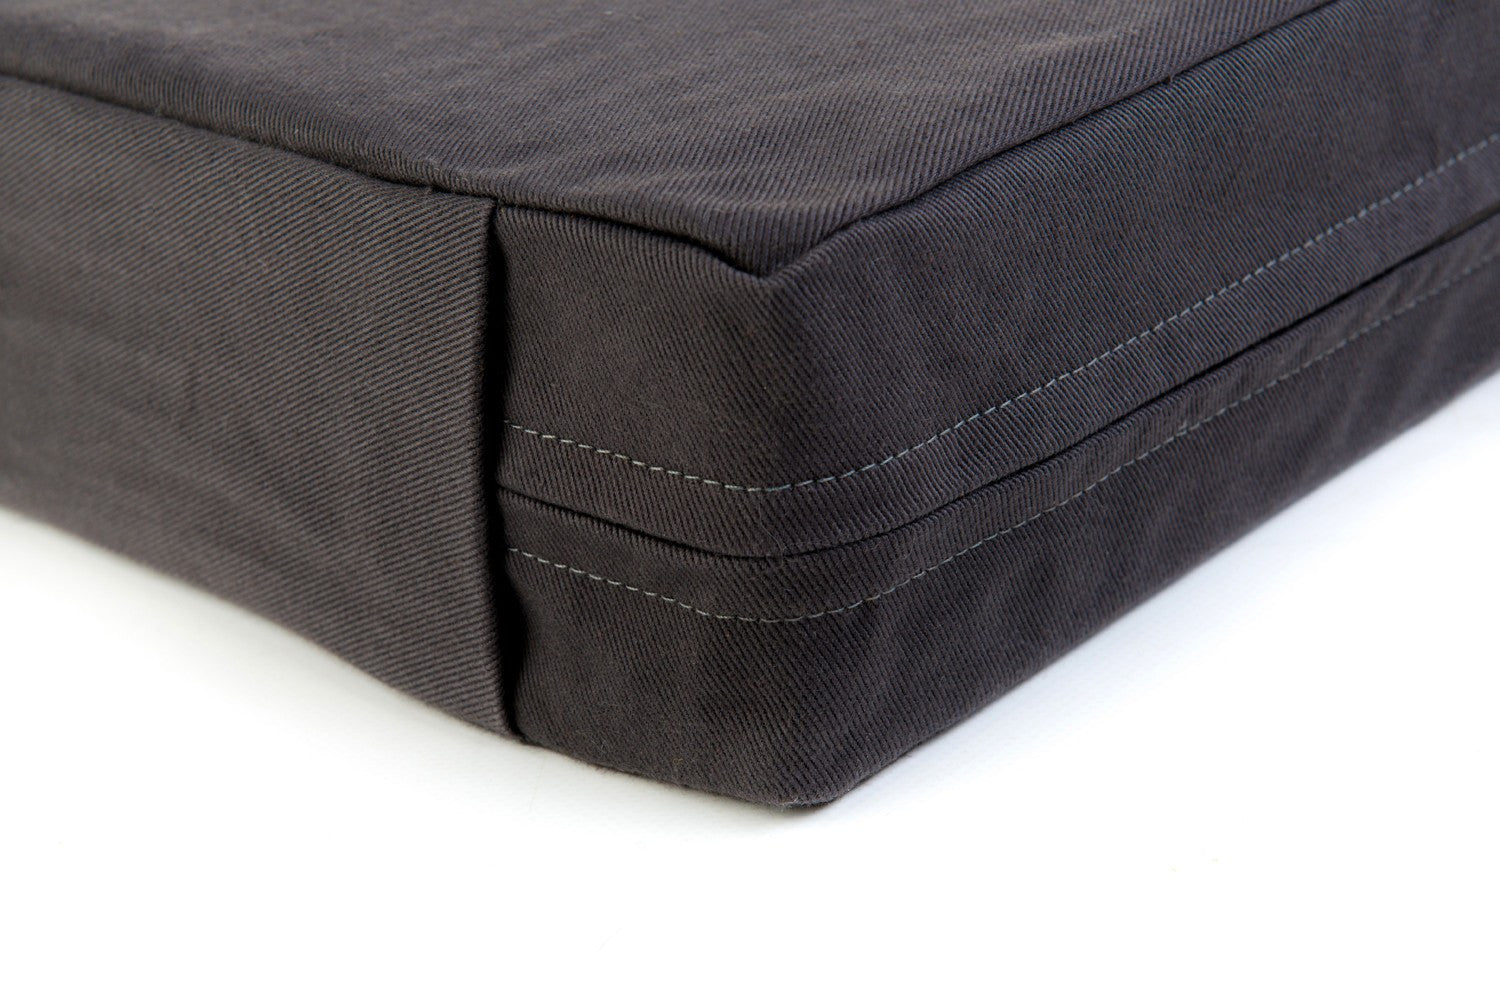 Float orthopaedic heated waterbed in charcoal cotton for dogs made in Britain from organic materials. 